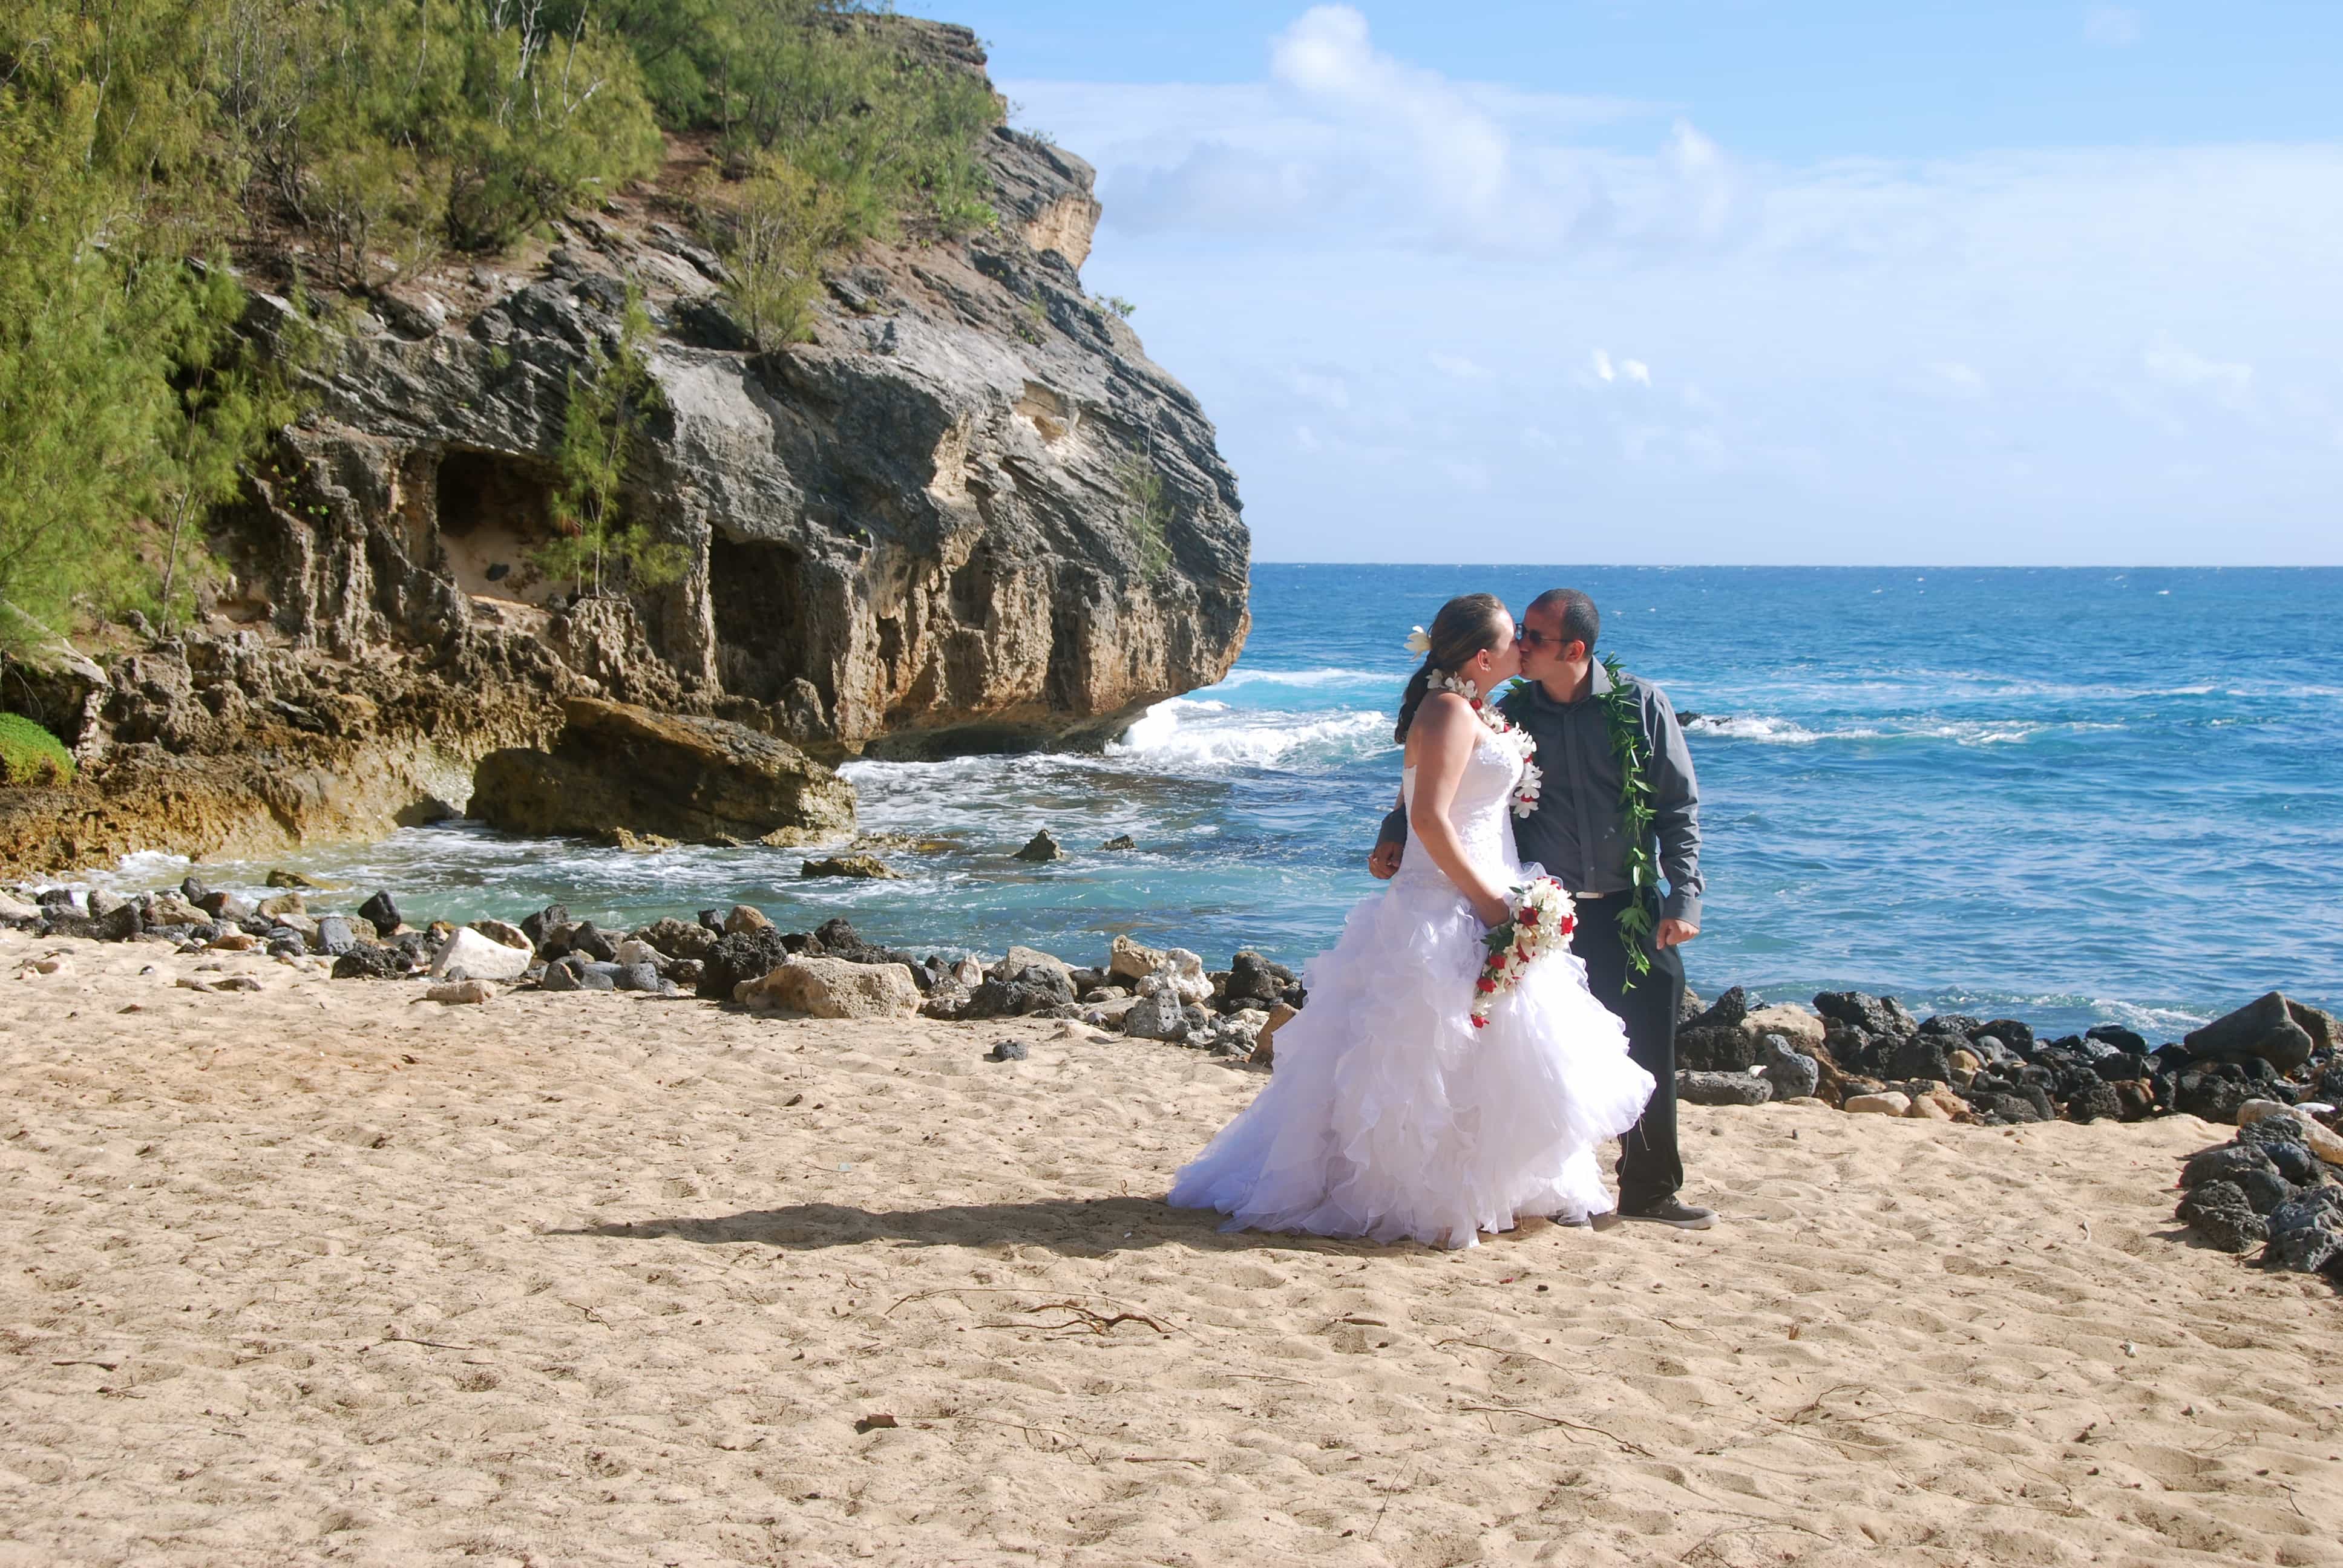 Beach Wedding Tips How To Reduce Costs Part 1